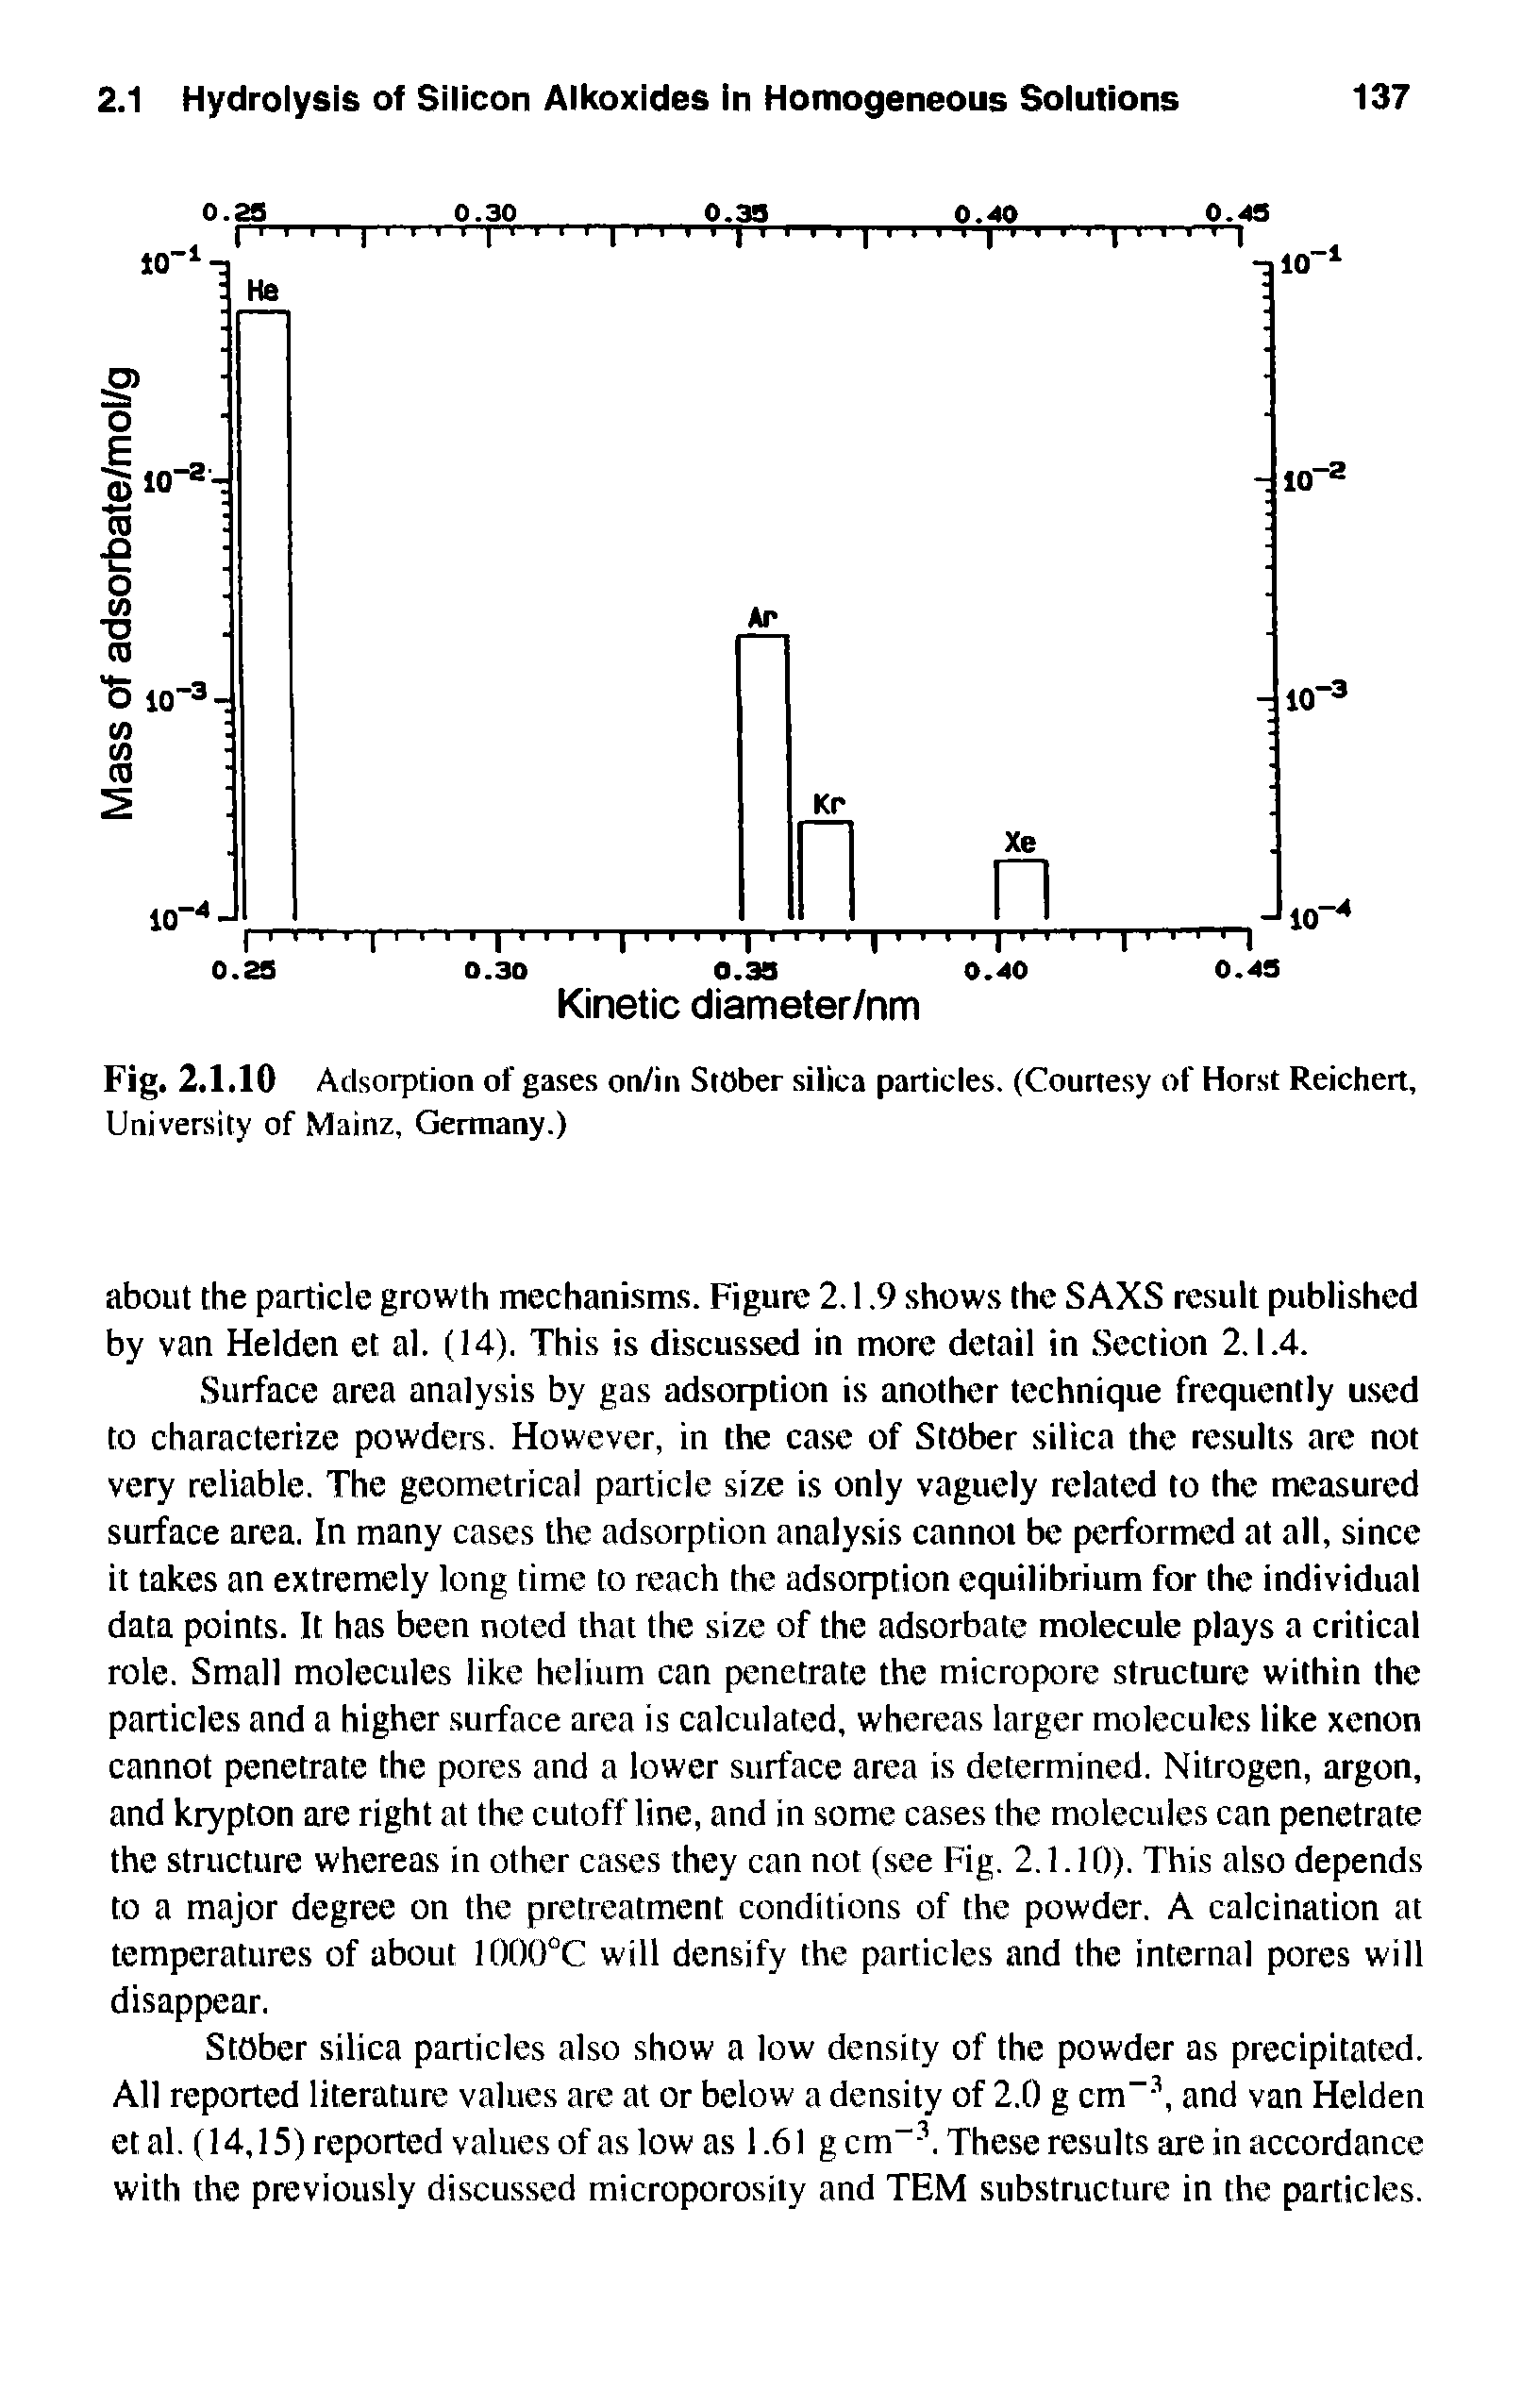 Fig. 2.1.10 Adsorption of gases on/in StOber silica particles. (Courtesy of Horst Reichert, University of Mainz, Germany.)...